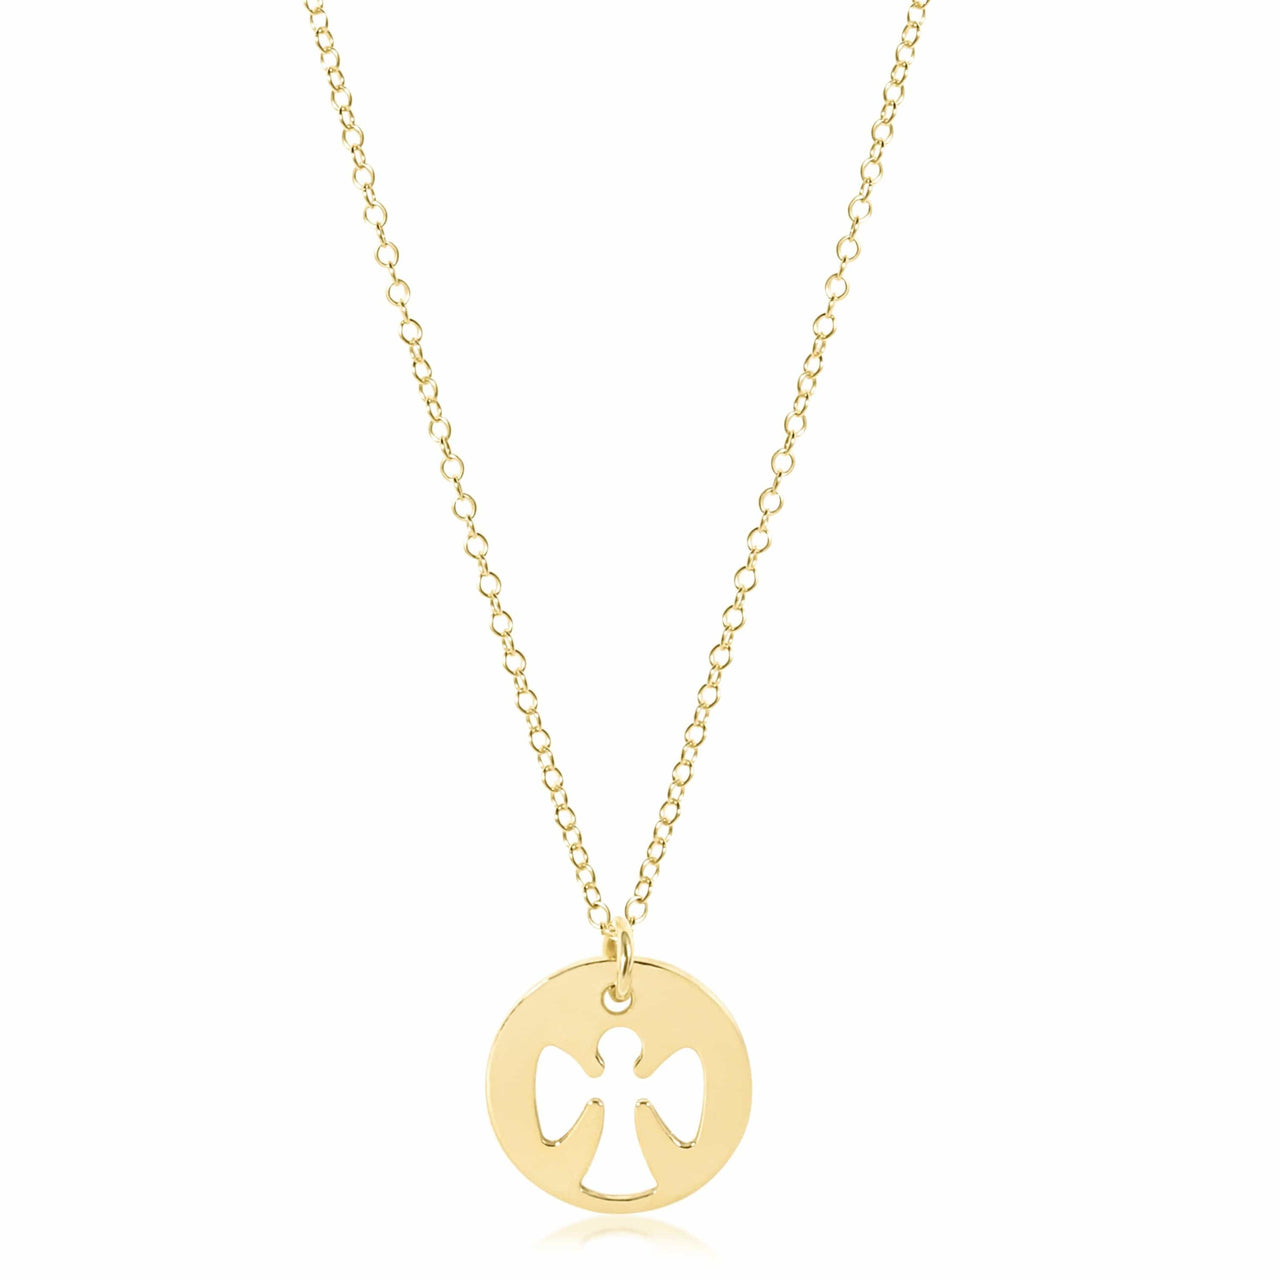 Guardian Angel Small Gold Charm  Necklace | e.newton Designs e.newton Designs Necklaces